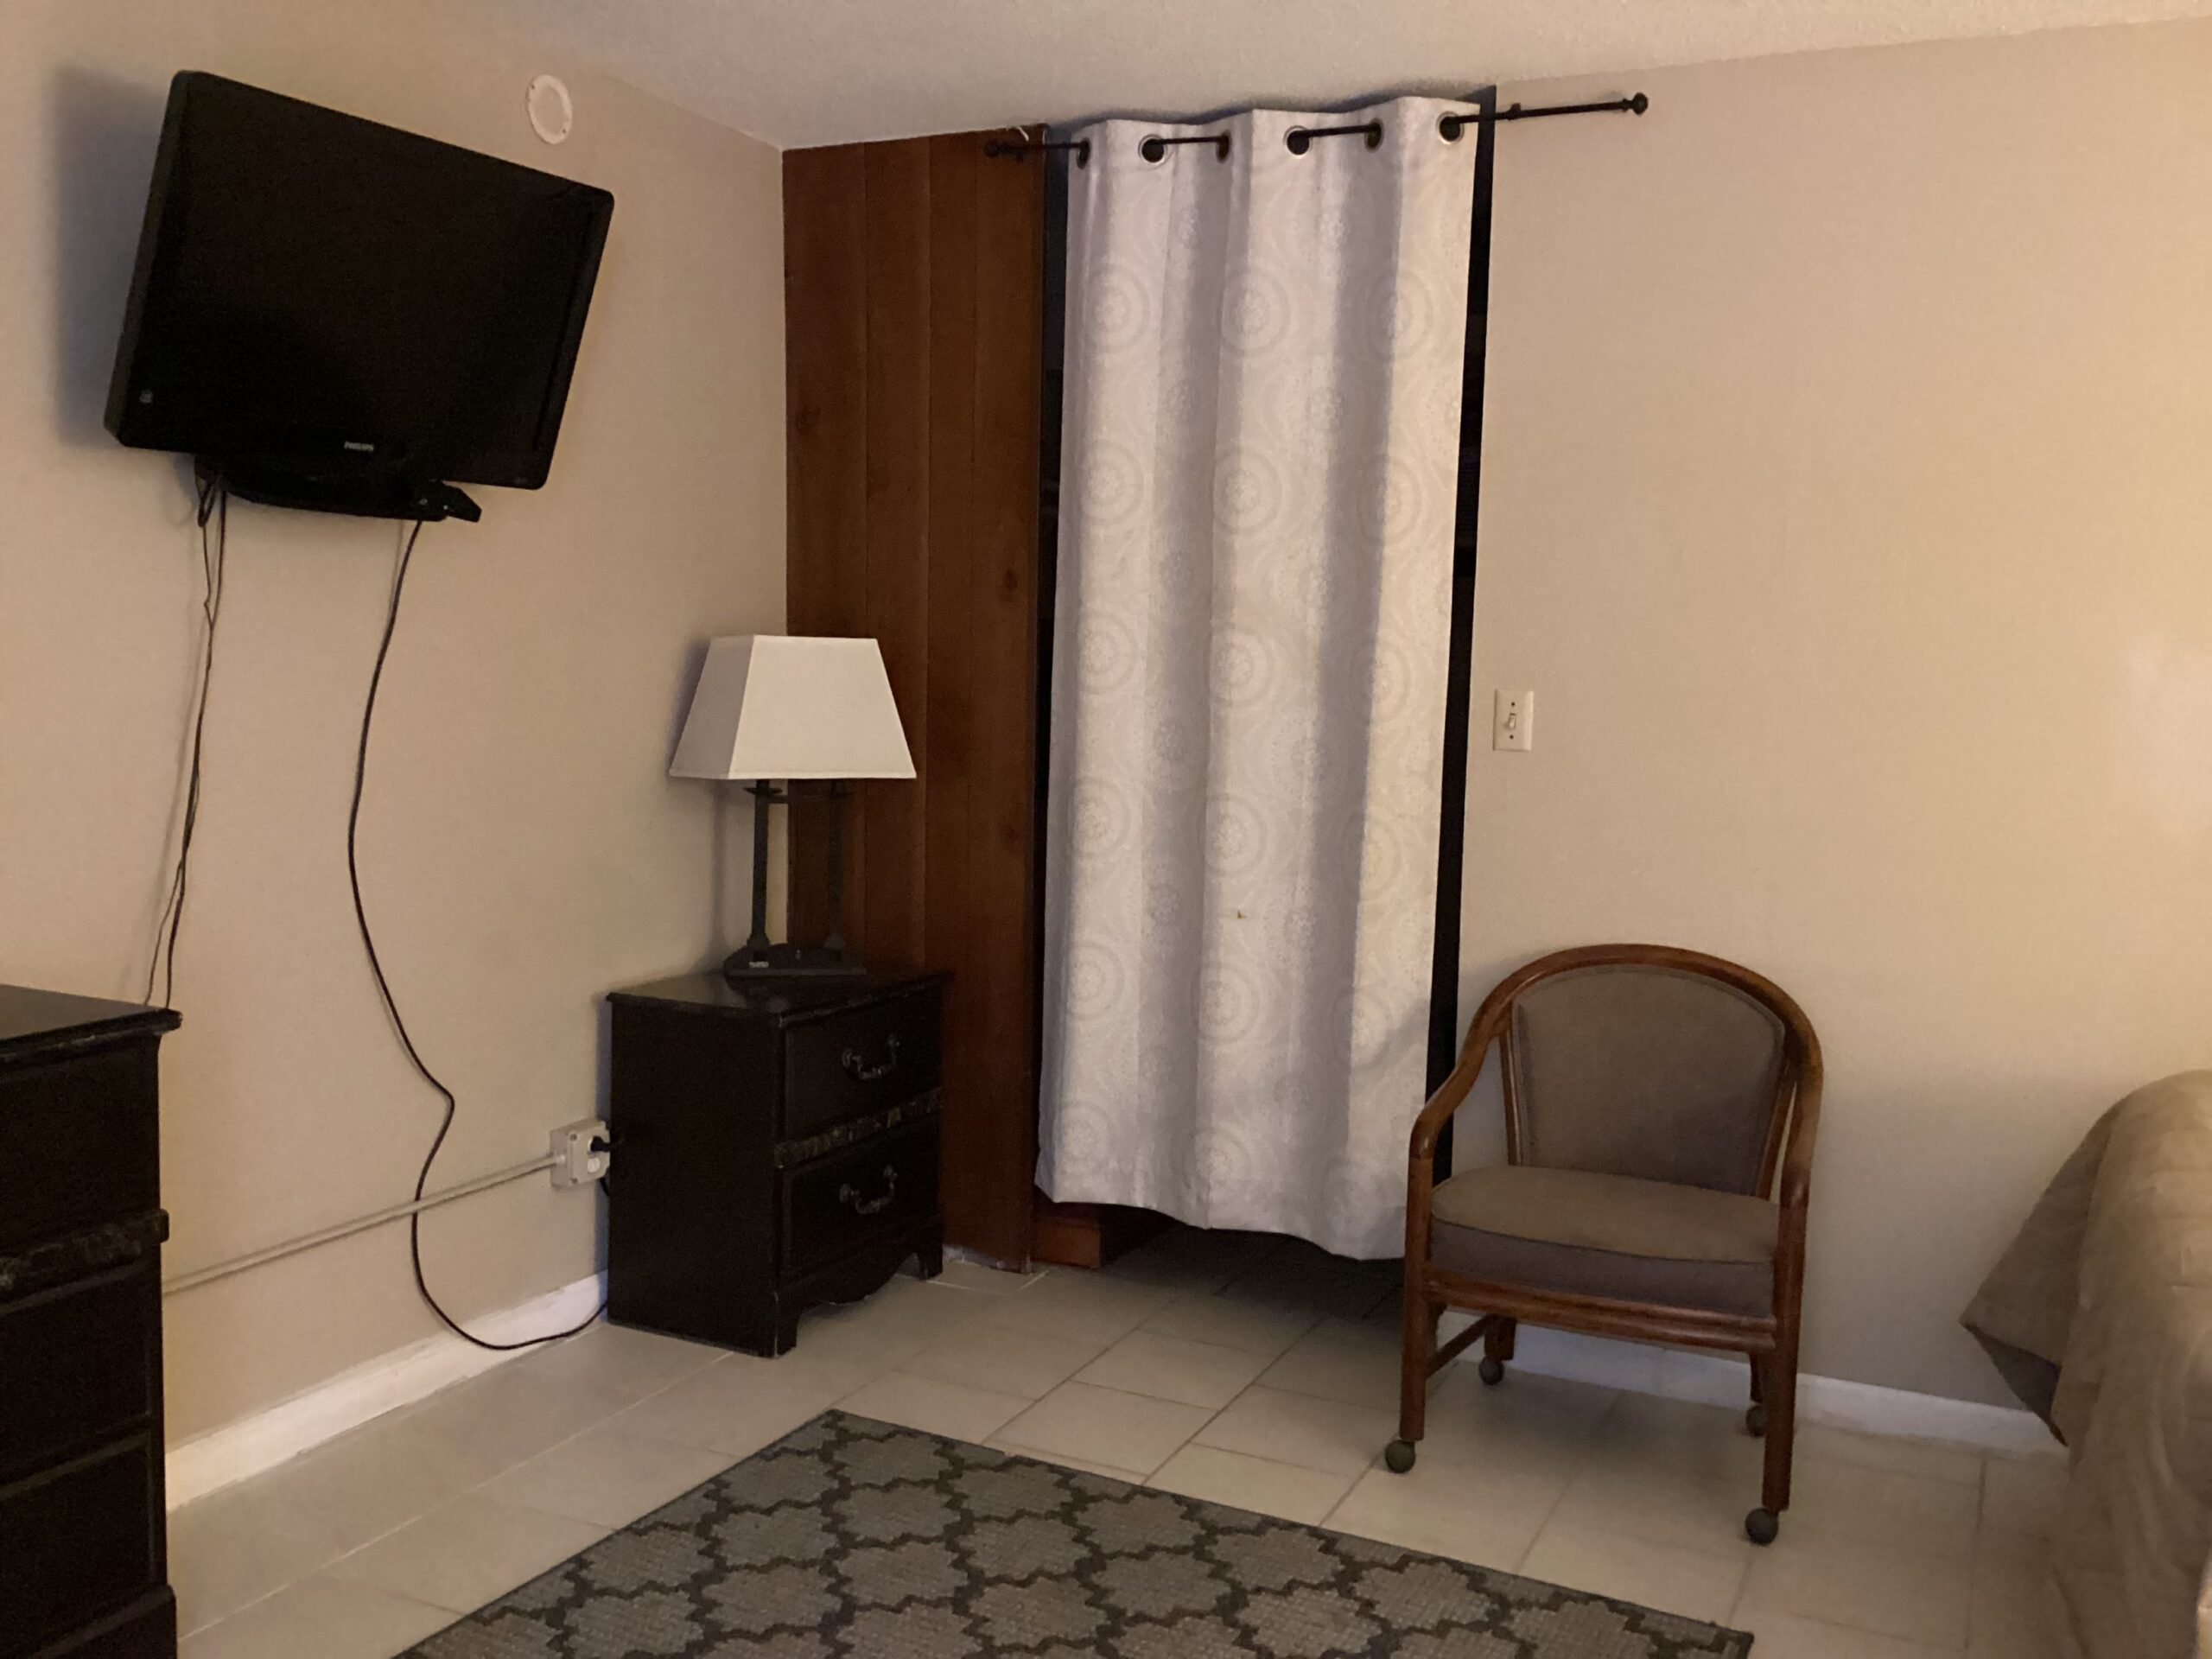 Picture of Television, Lamp and Curtain